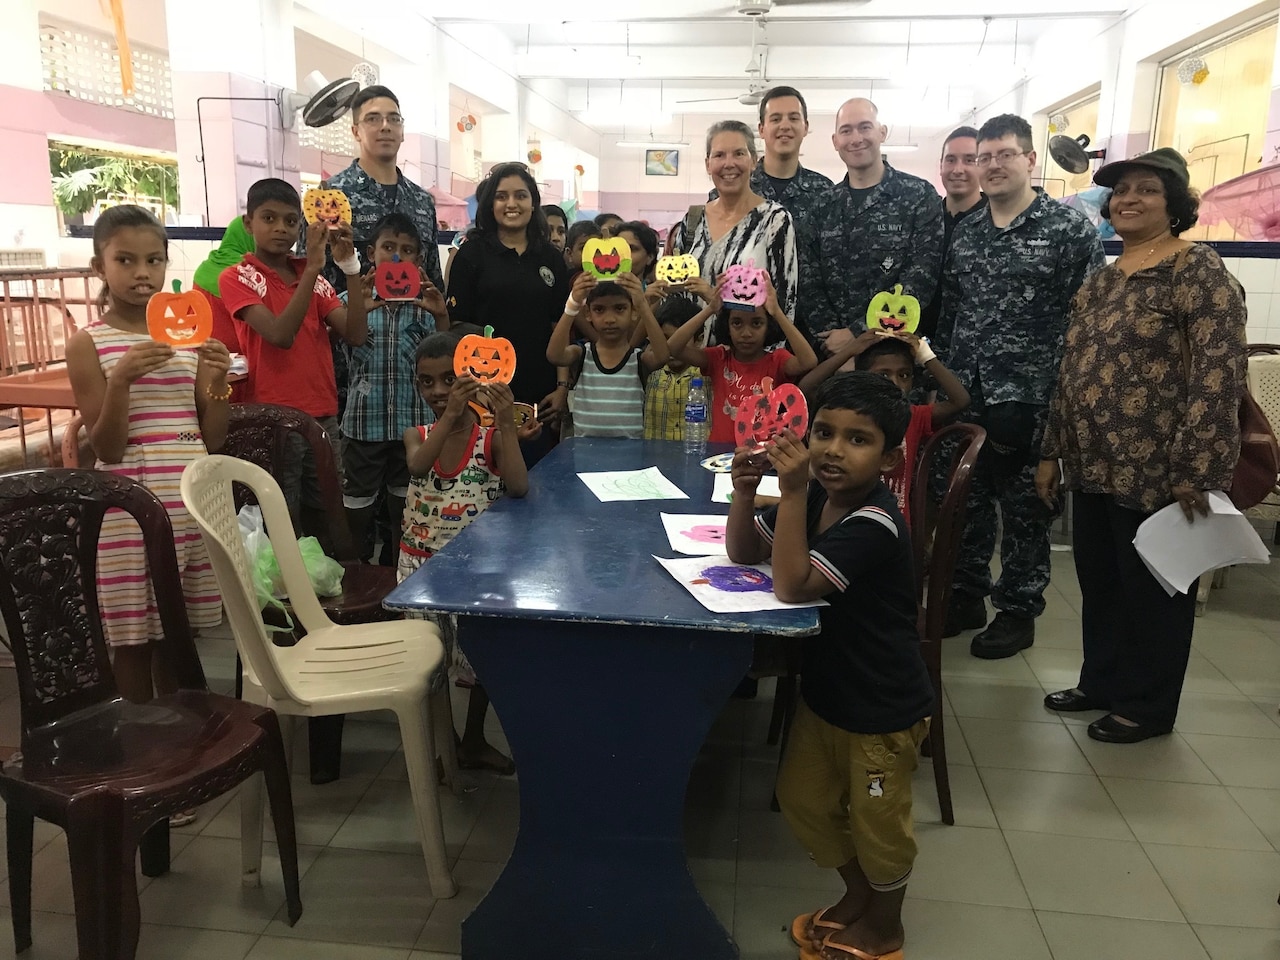 Sailors, embassy volunteers and patients display crafts made during visit to Sri Lankan children's hospital.